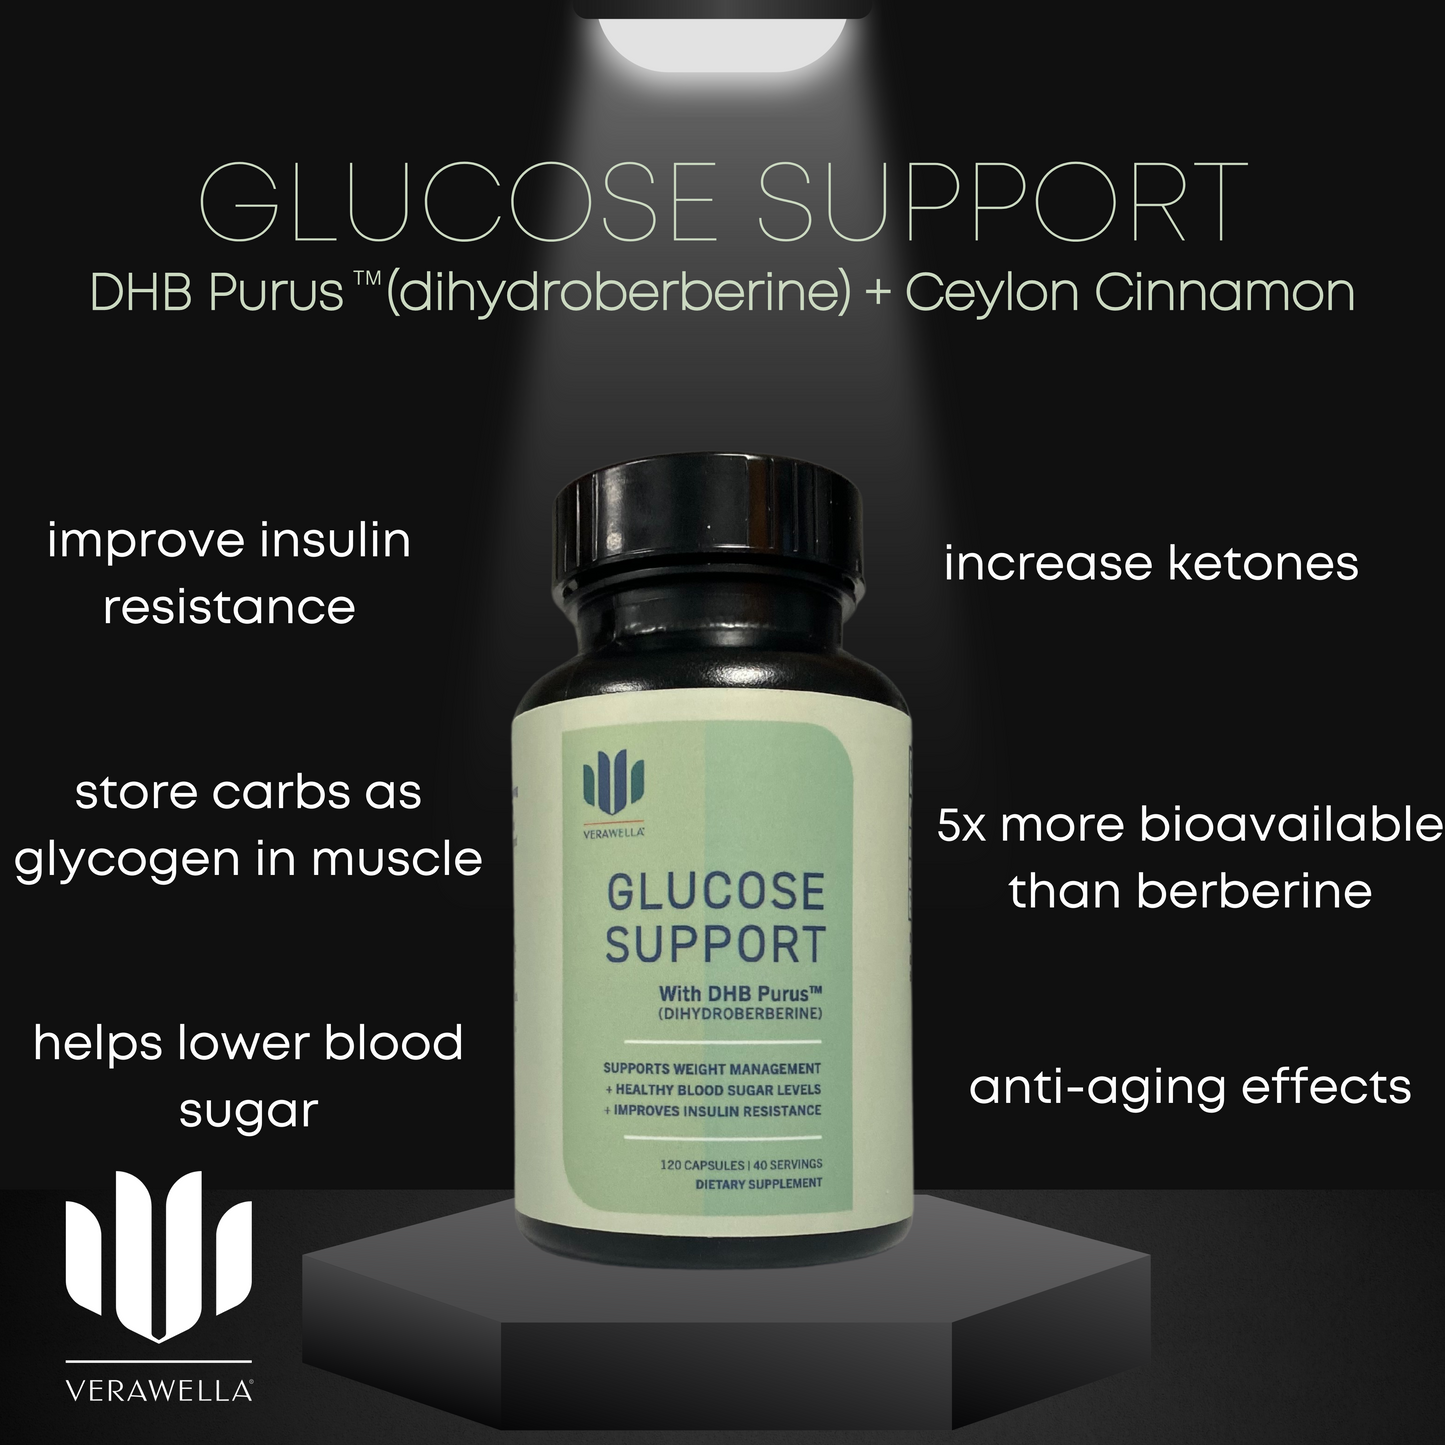 Glucose Support, DHB Purus, dihydroberberine supplement to help with insulin resistance, lower blood sugar, turn carbs into glycogen, in muscle, increase ketones, with anti aging properties.